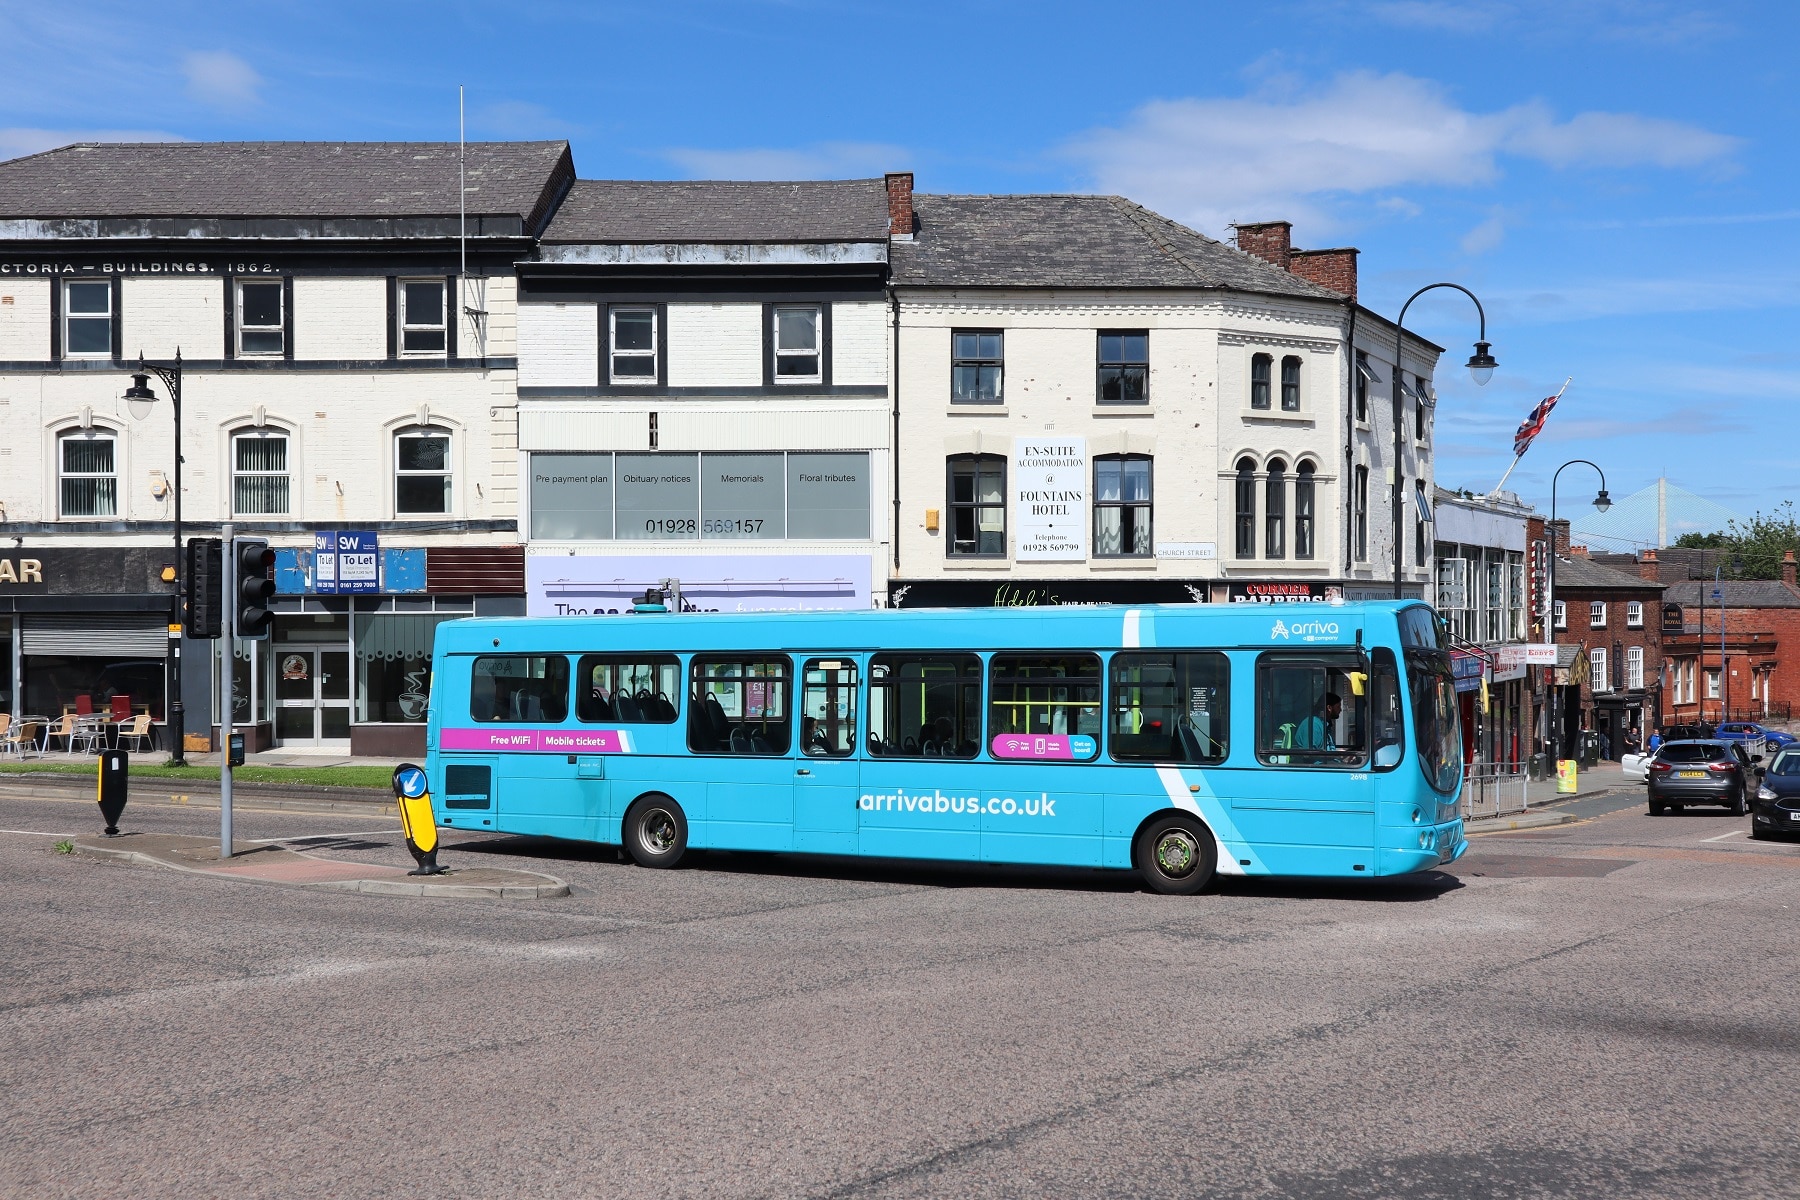 BODS expansion planned by DfT Open Buses team